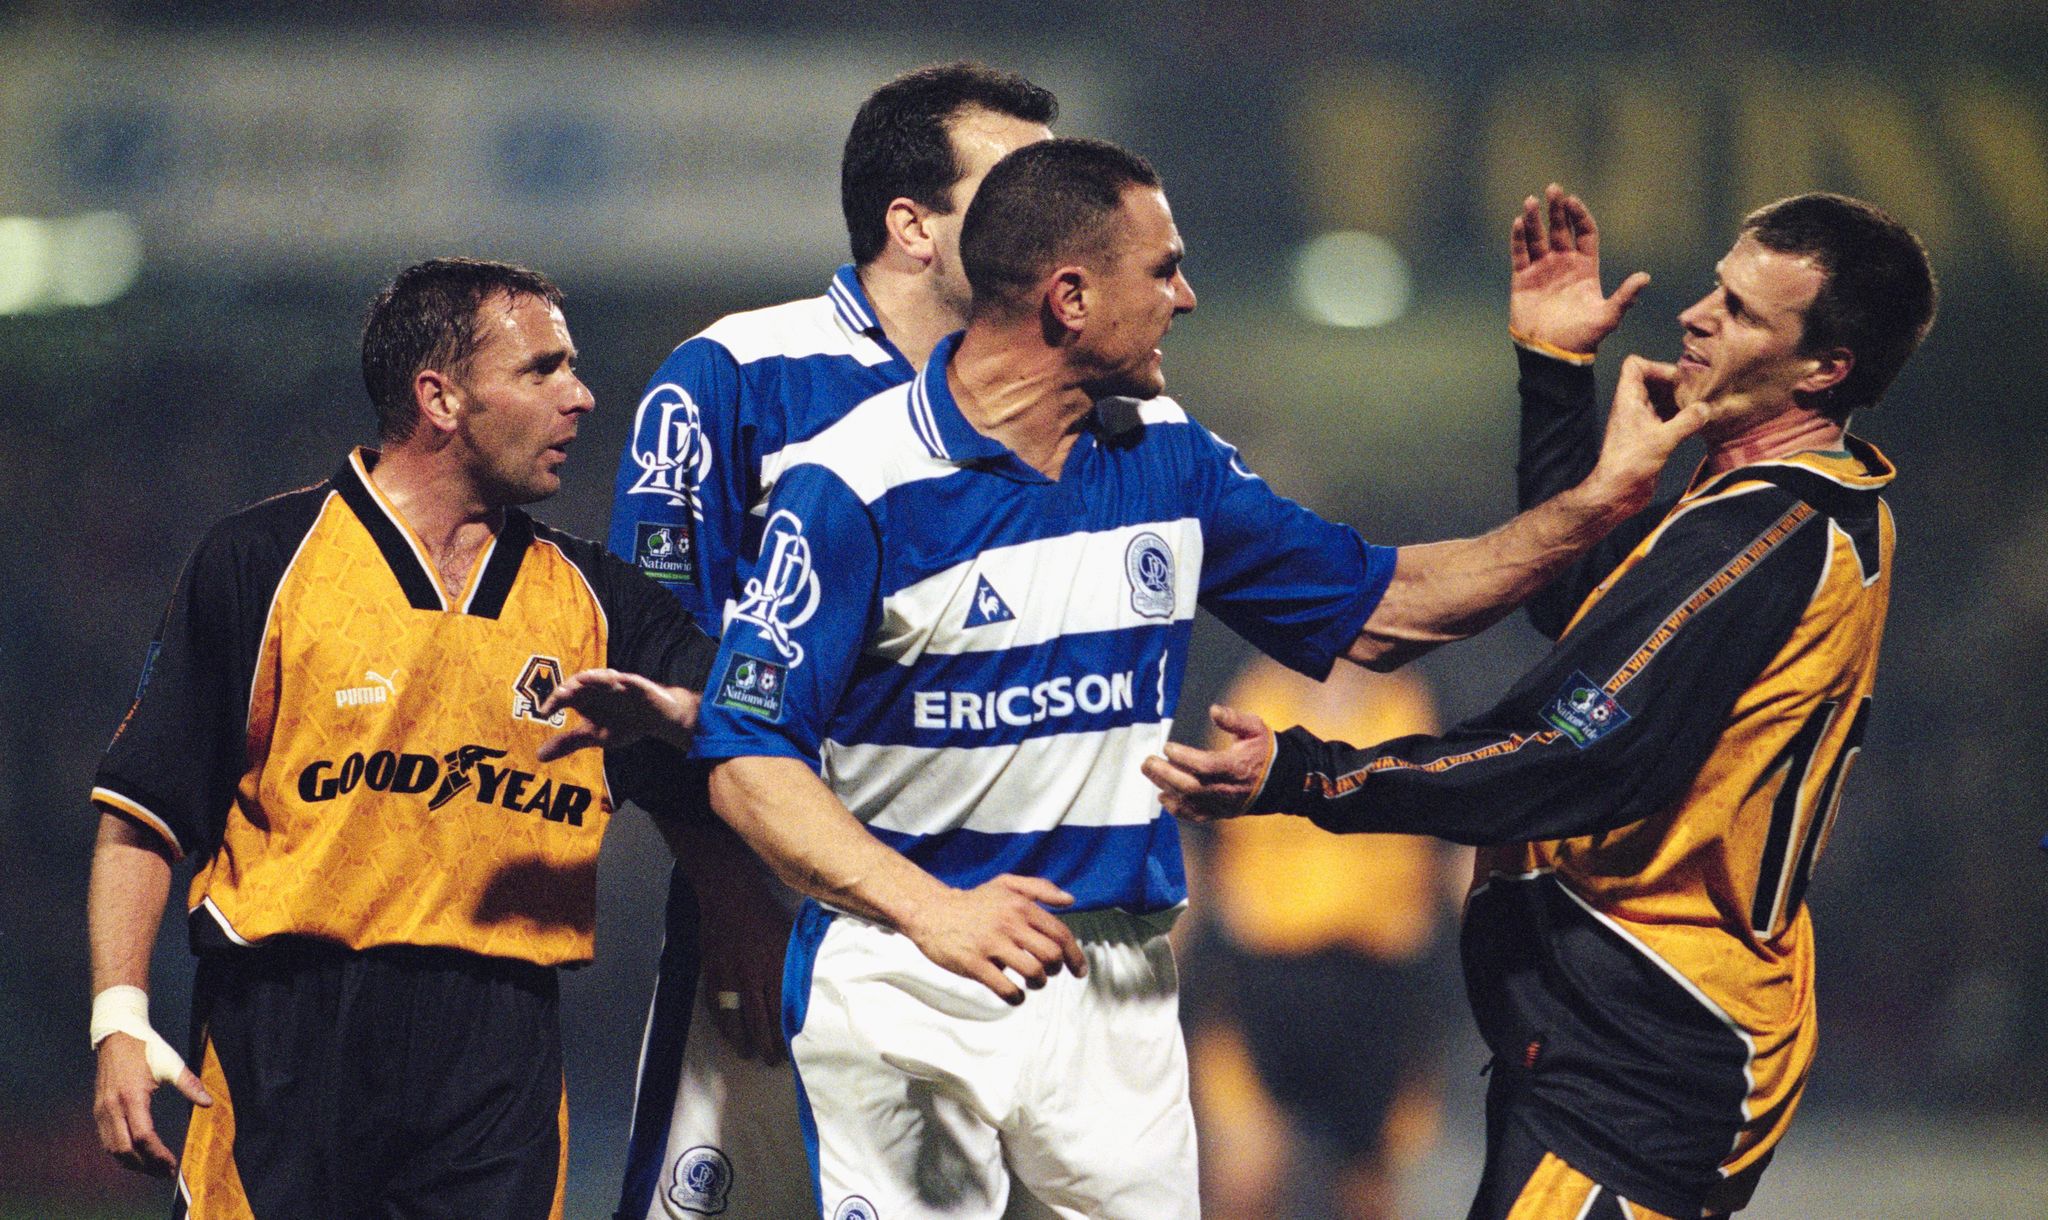 london, united kingdom april 01 qpr player vinnie jones c gets to grips with wolves player steve claridge as paul simpson l and neil ruddock obscured look on during a league division one match between queens park rangers and wolverhampton wanderers at loftus road on april 1, 1998 in london, england photo by alex liveseyallsportgetty images